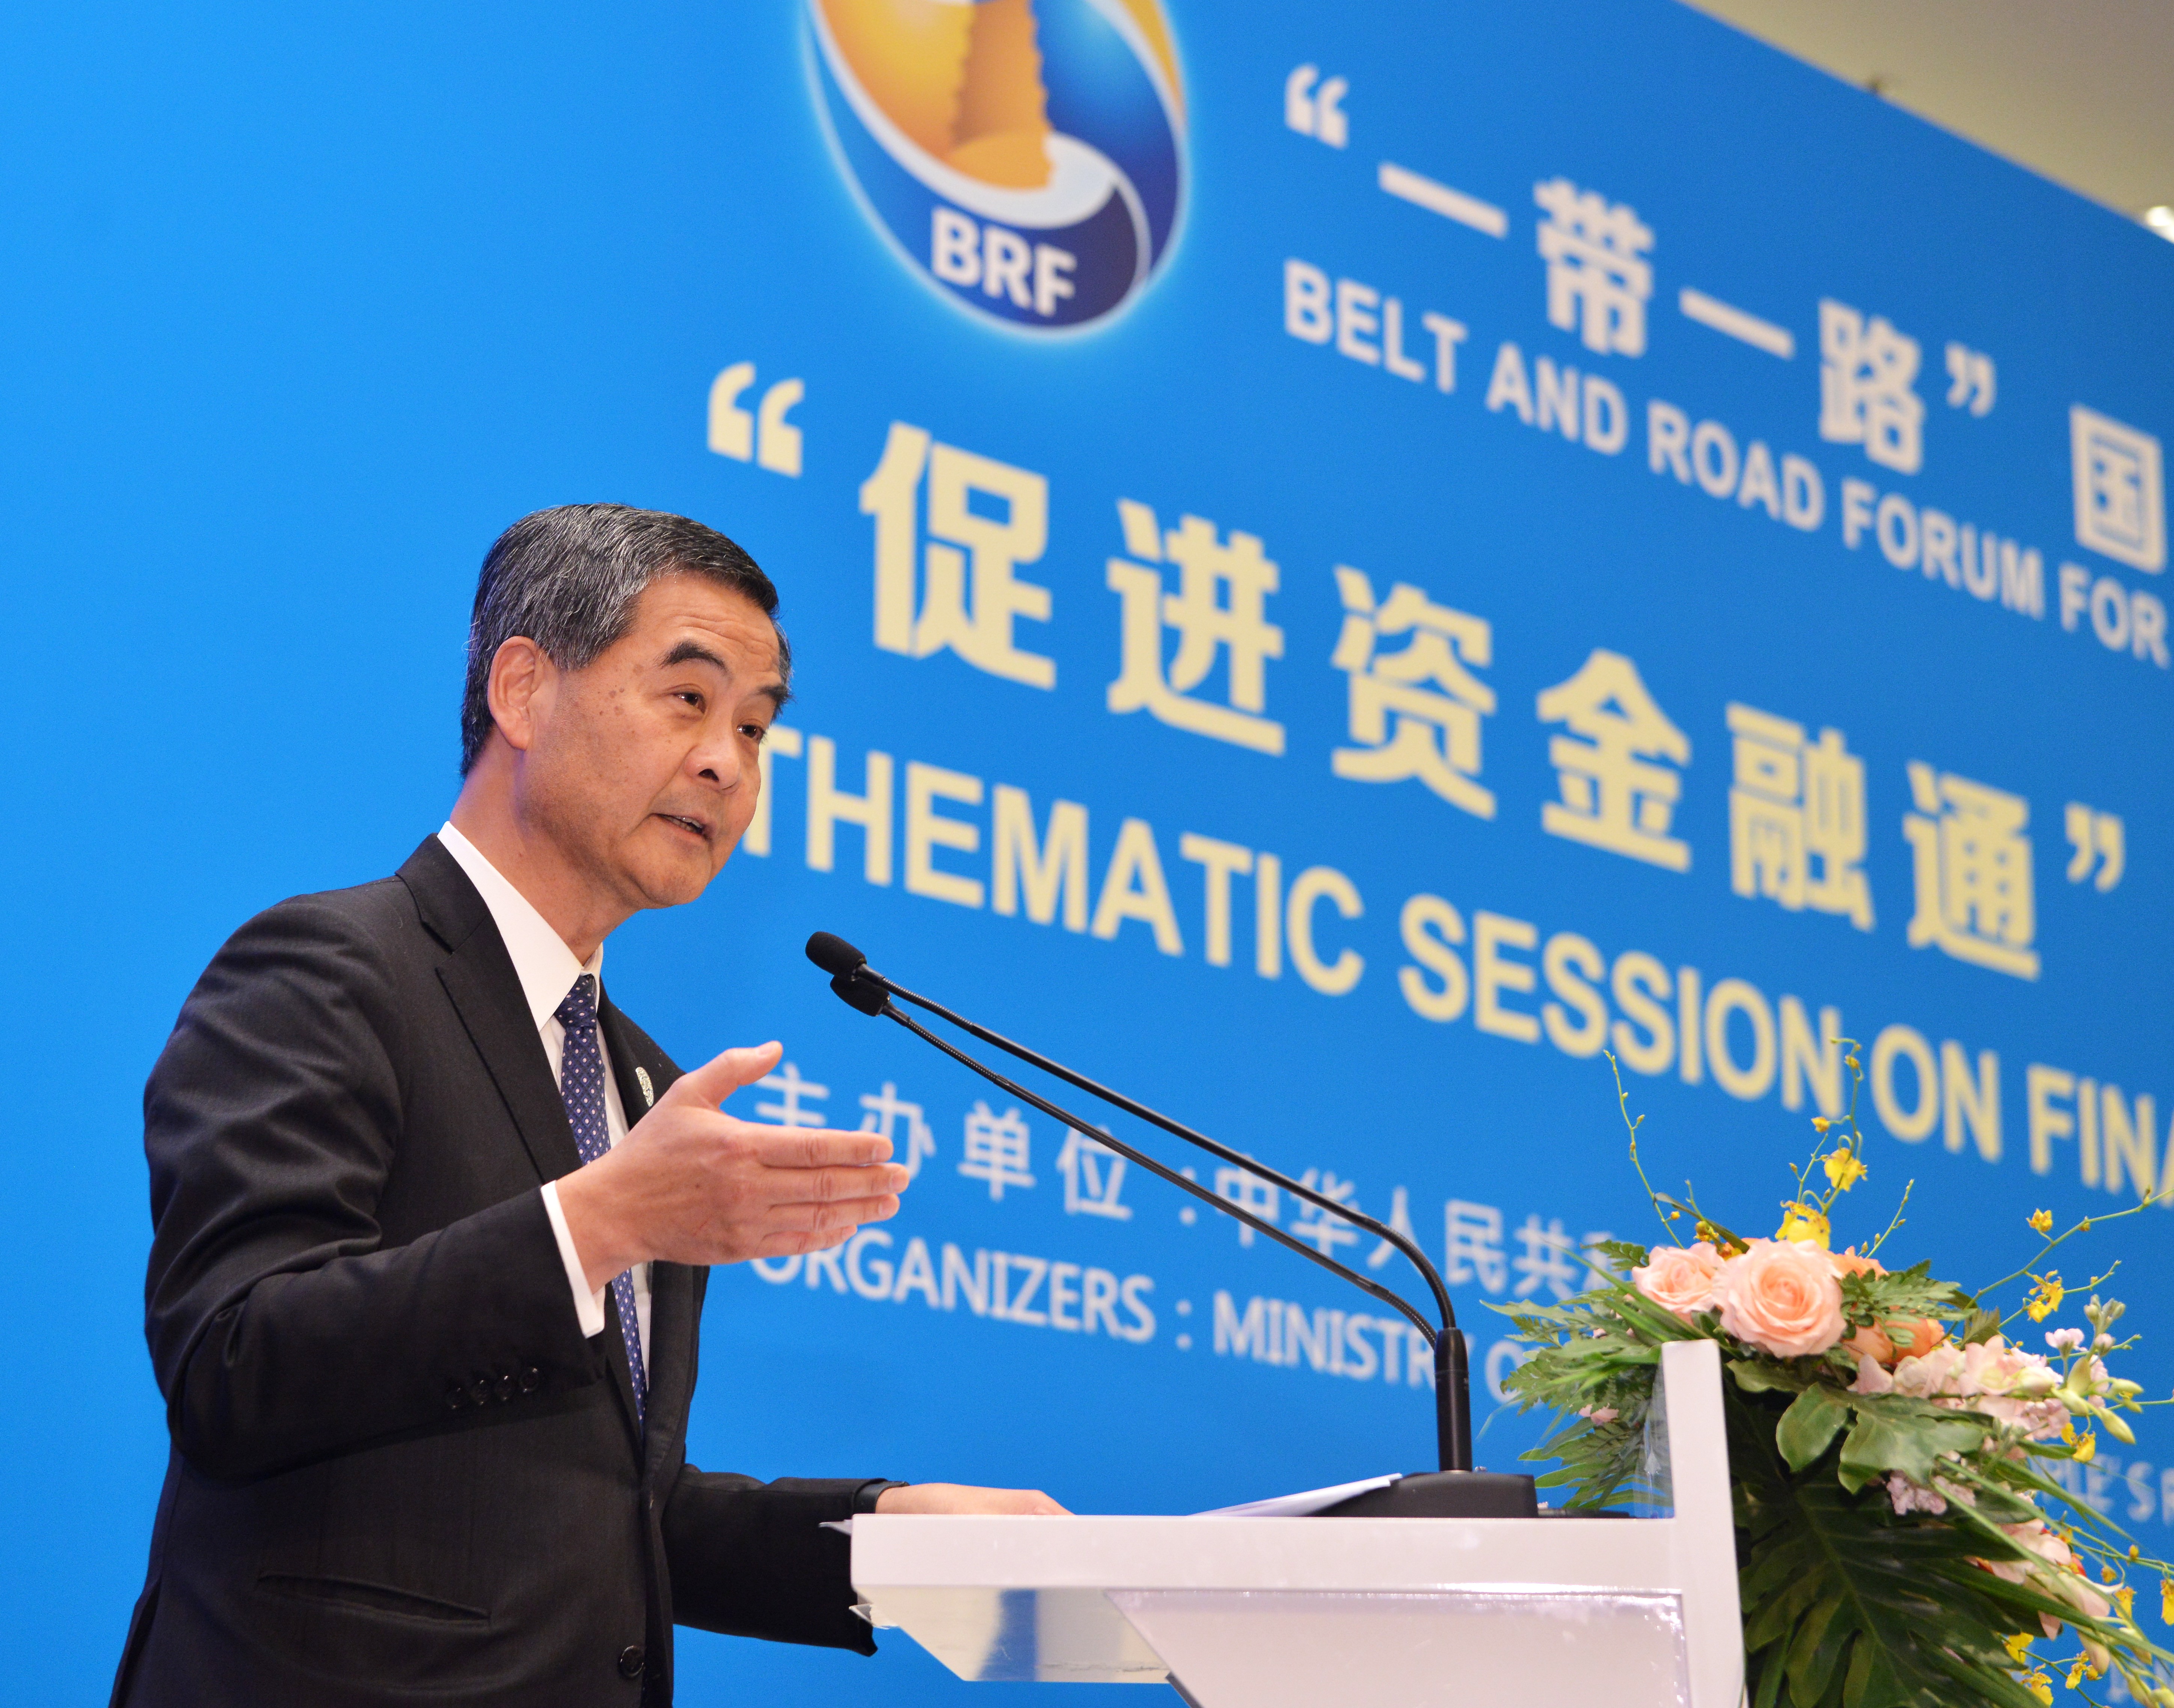 Hong Kong’s outgoing chief executive, Leung Chun-ying, addresses a session on financial connectivity at the Belt and Road Forum in Beijing on May 14. Leung has labelled Hong Kong as a “super connector” between mainland China and the world. Photo: Handout